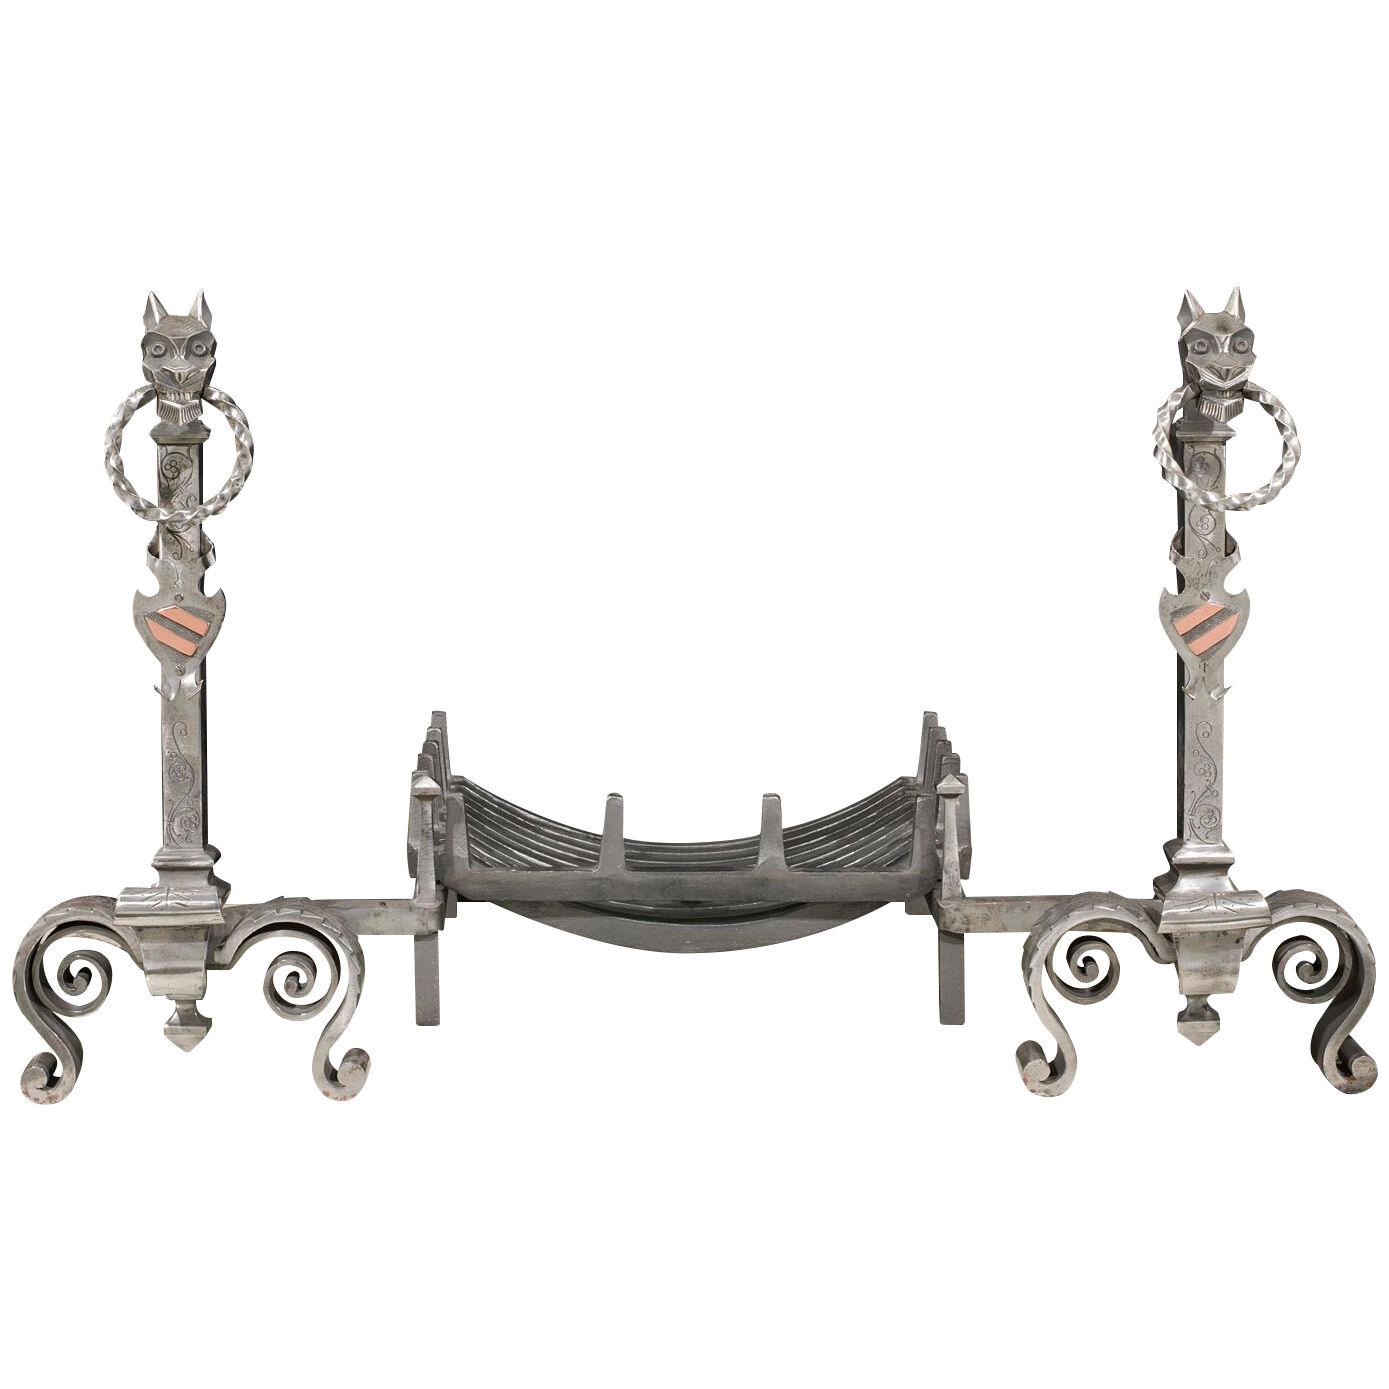 Wrought Iron Gothic Style Antique Fire Dogs